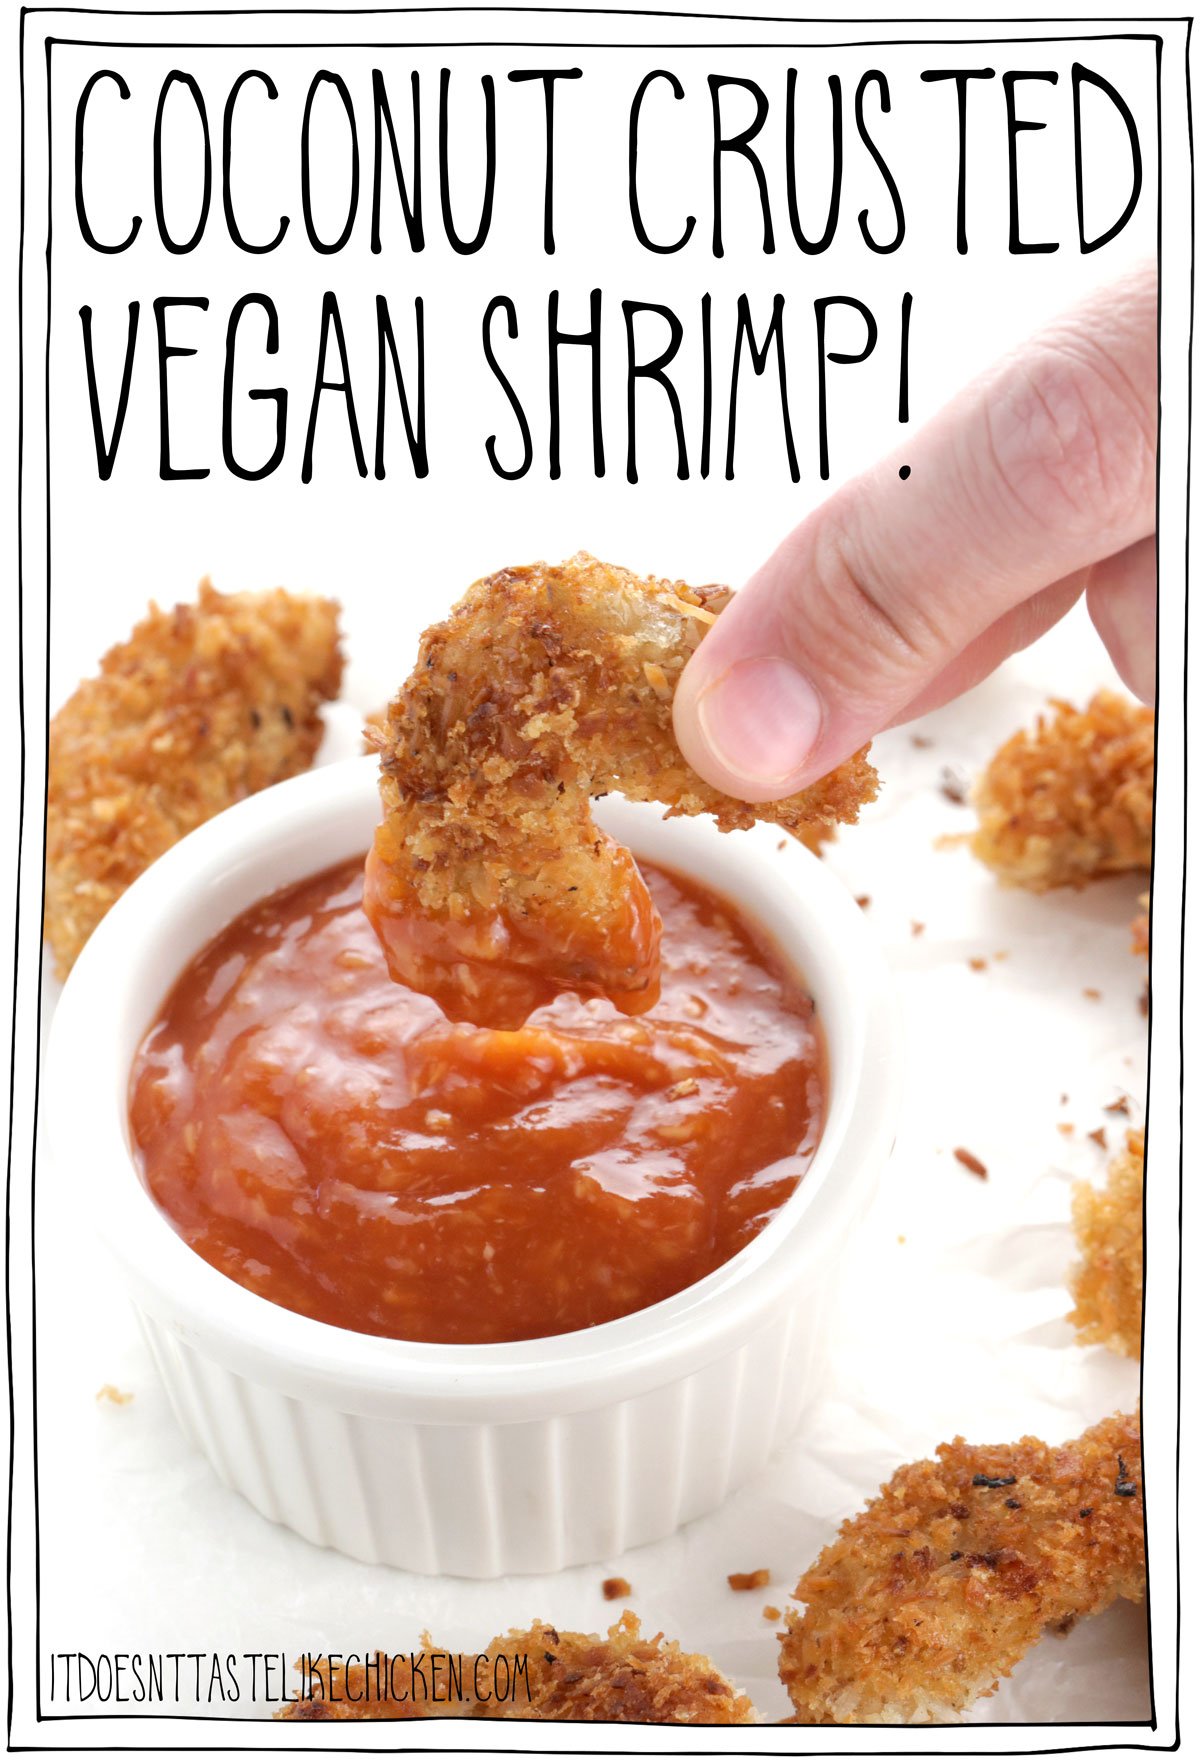 Coconut Crusted Vegan Shrimp! Golden, crispy, coconut coated on the outside, lightly chewy, juicy, with a slight taste of the sea on the inside. Serve these with homemade cocktail sauce for a real crowd-pleaser. The secret ingredient to make these shrimp: soy curls! Oil-free and air fryer versions are included in the recipe notes! #itdoesnttastelikechicken #veganshrimp #veganseafood